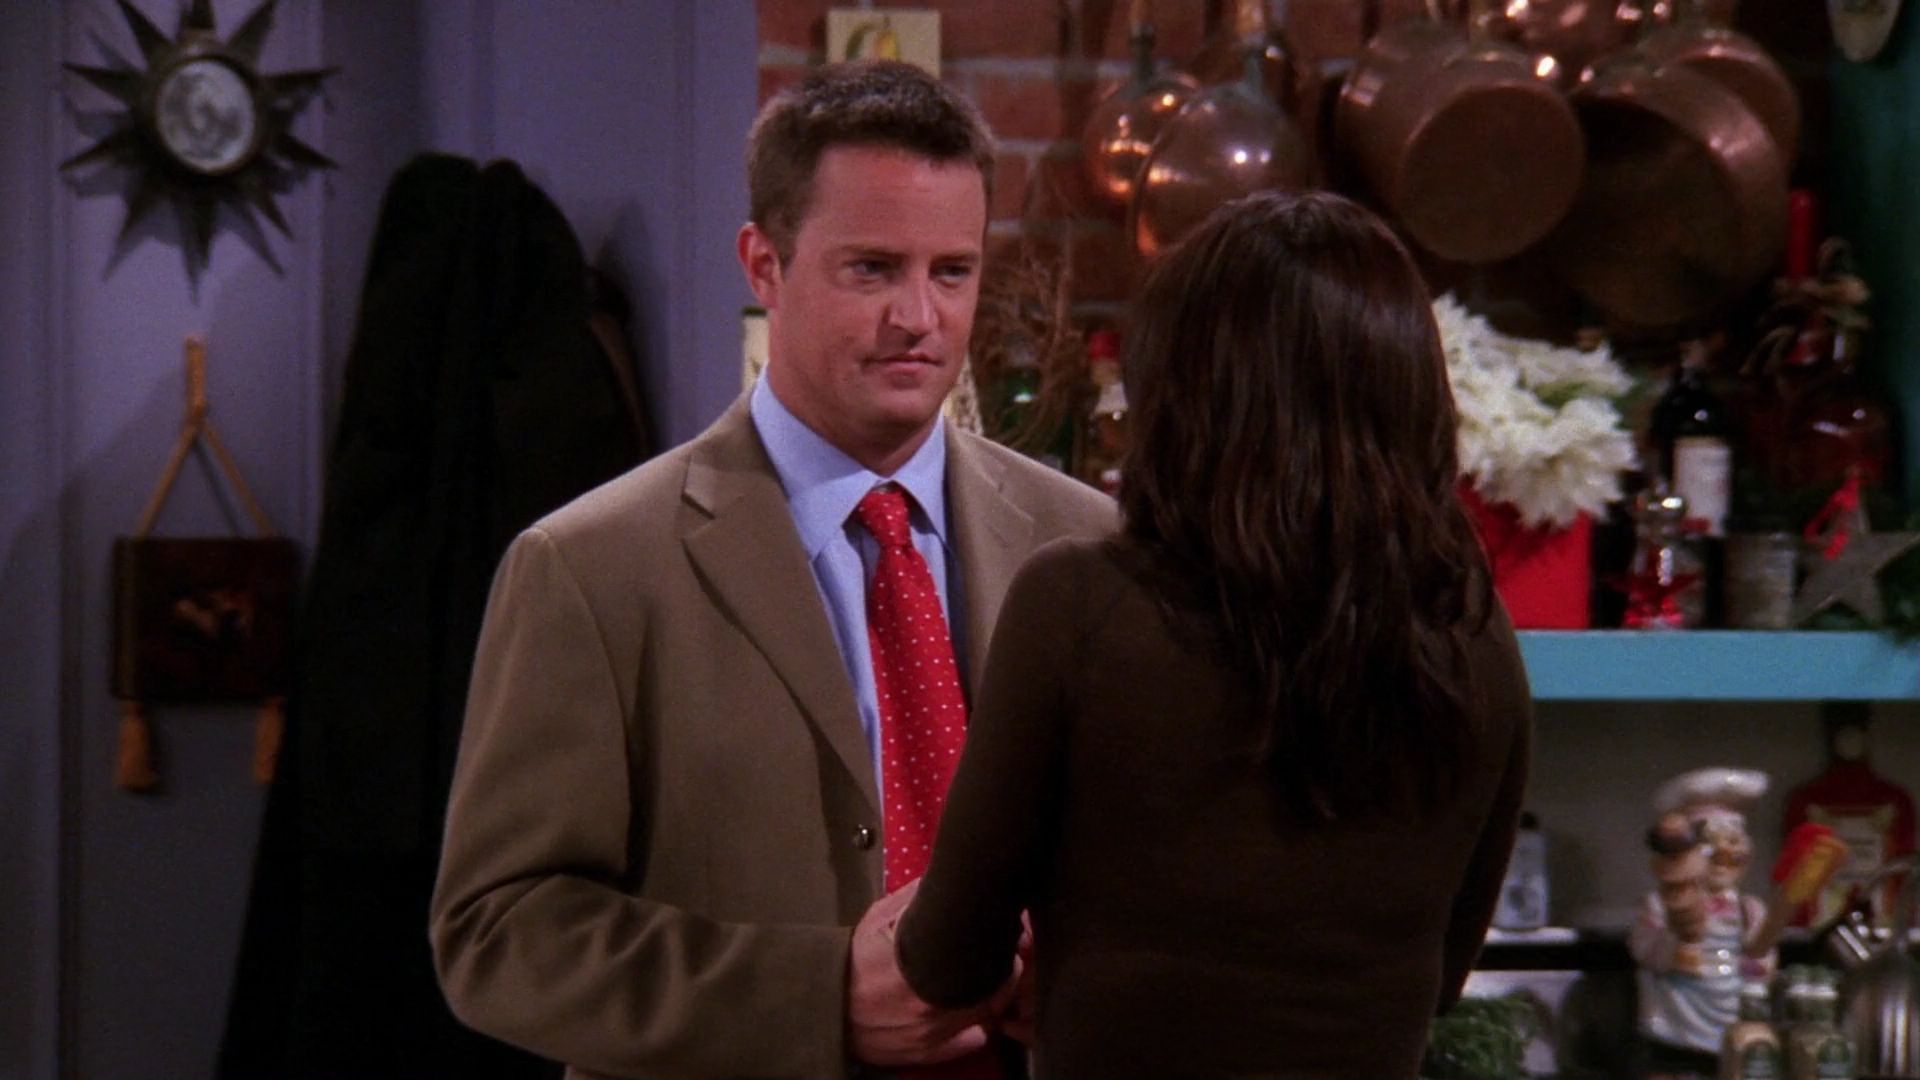 Chandler returns home from Tulsa on Christmas after quitting his job for good in Friends